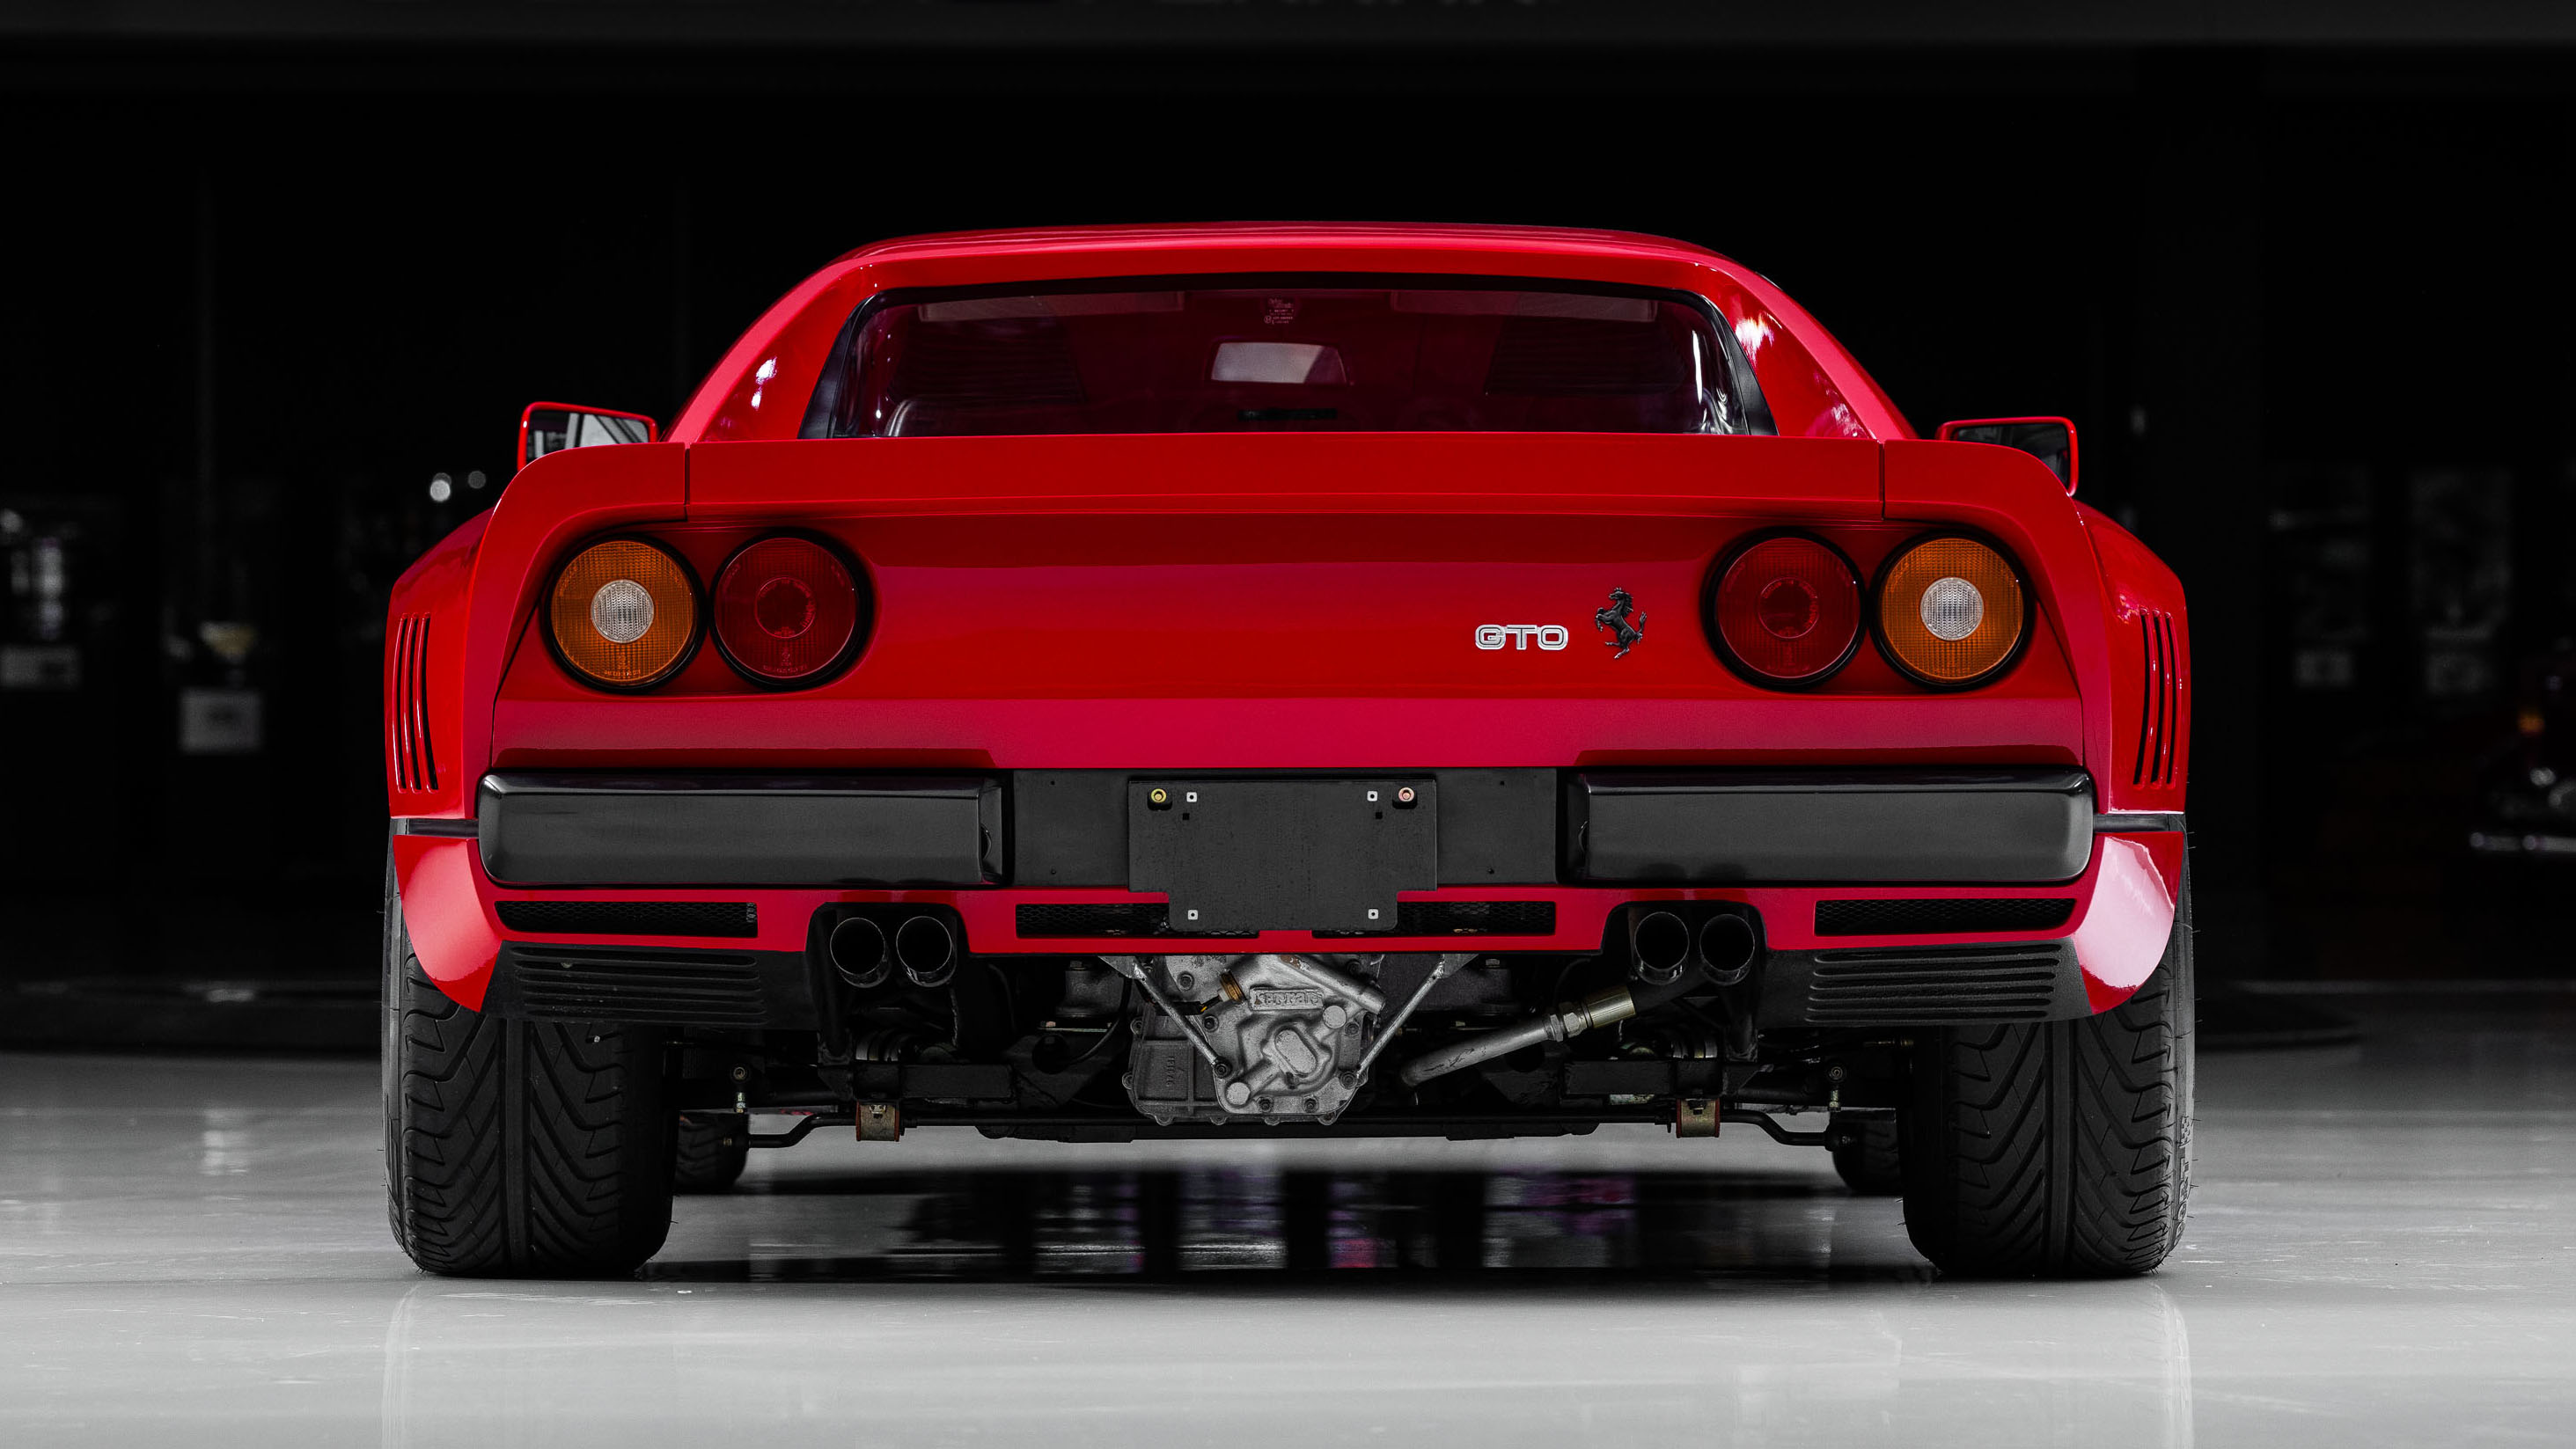 would you rather buy 200 dacia springs or this ferrari 288 gto?